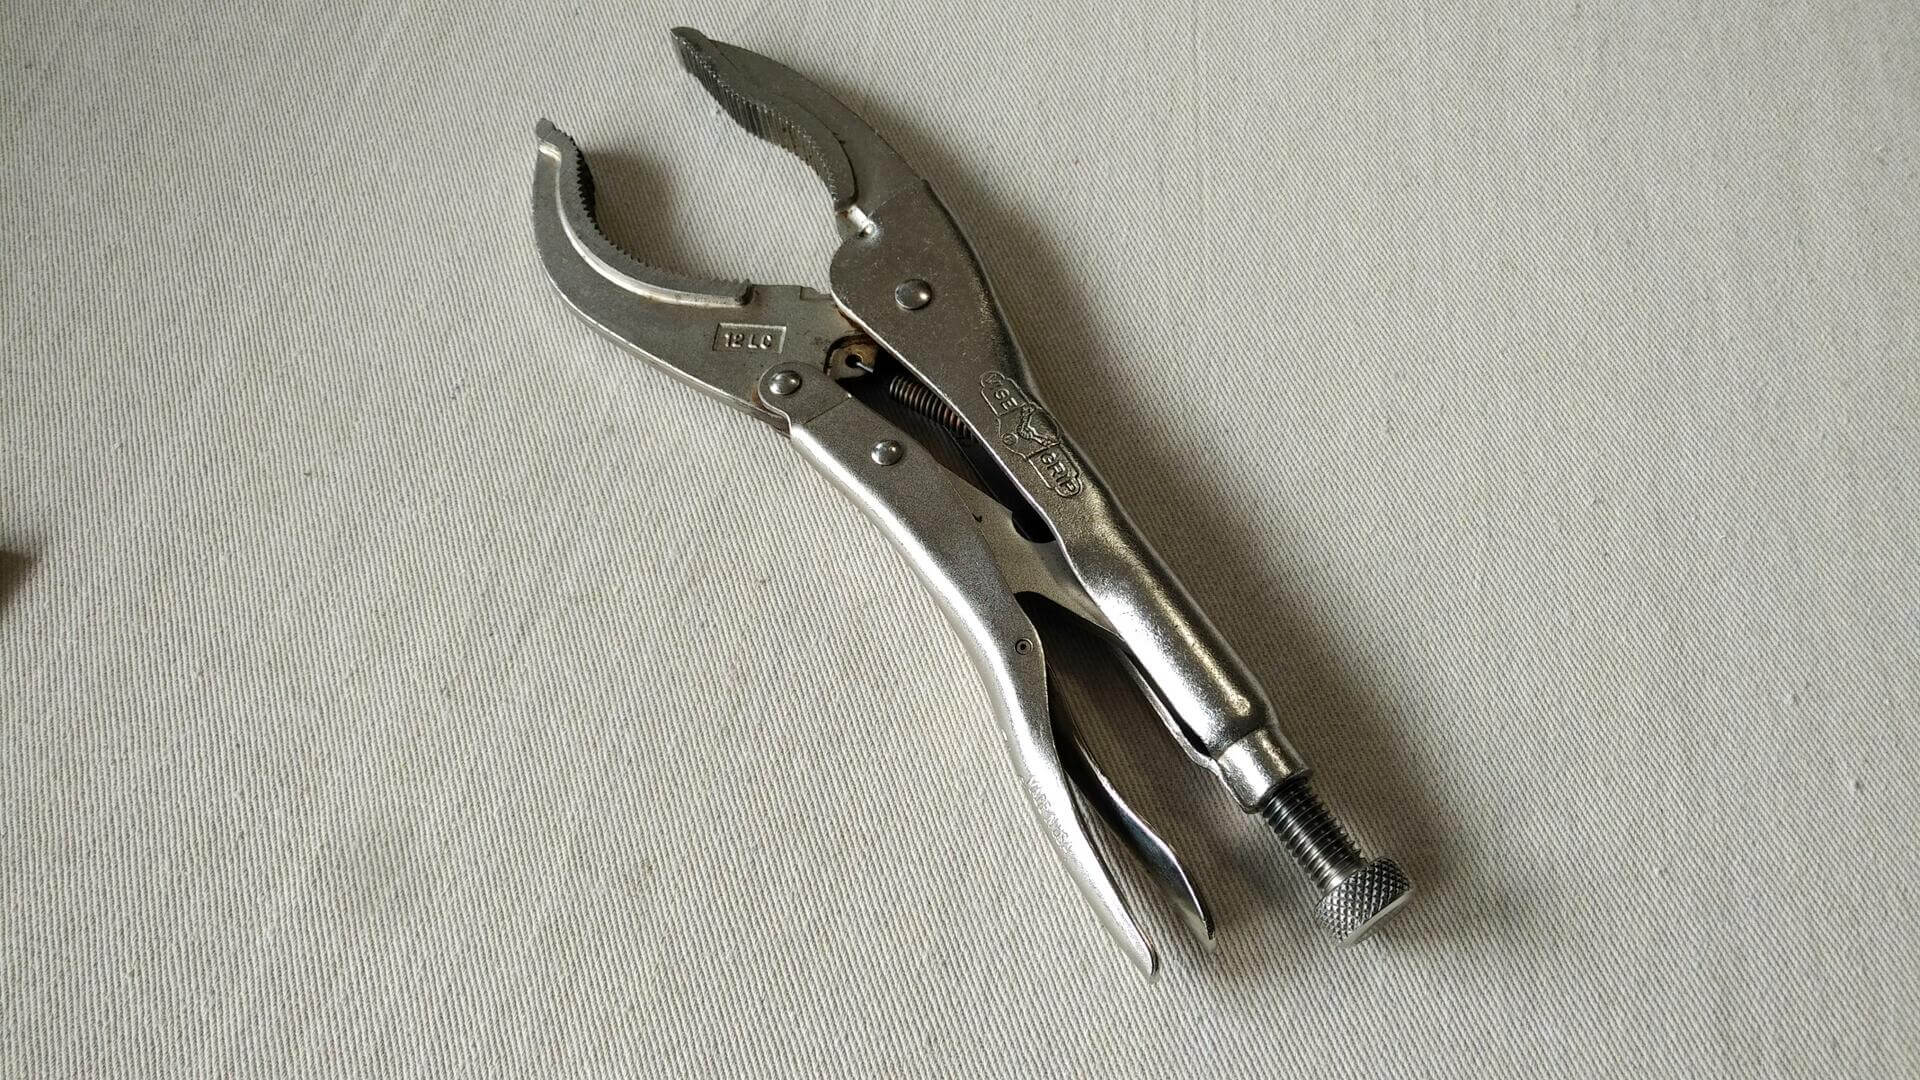 Vintage Petersen Mfg Co large capacity lever locking pliers Vise-Grip 12LC Antique made in USA collectible automotive, plumbing, welding gripping hand tools